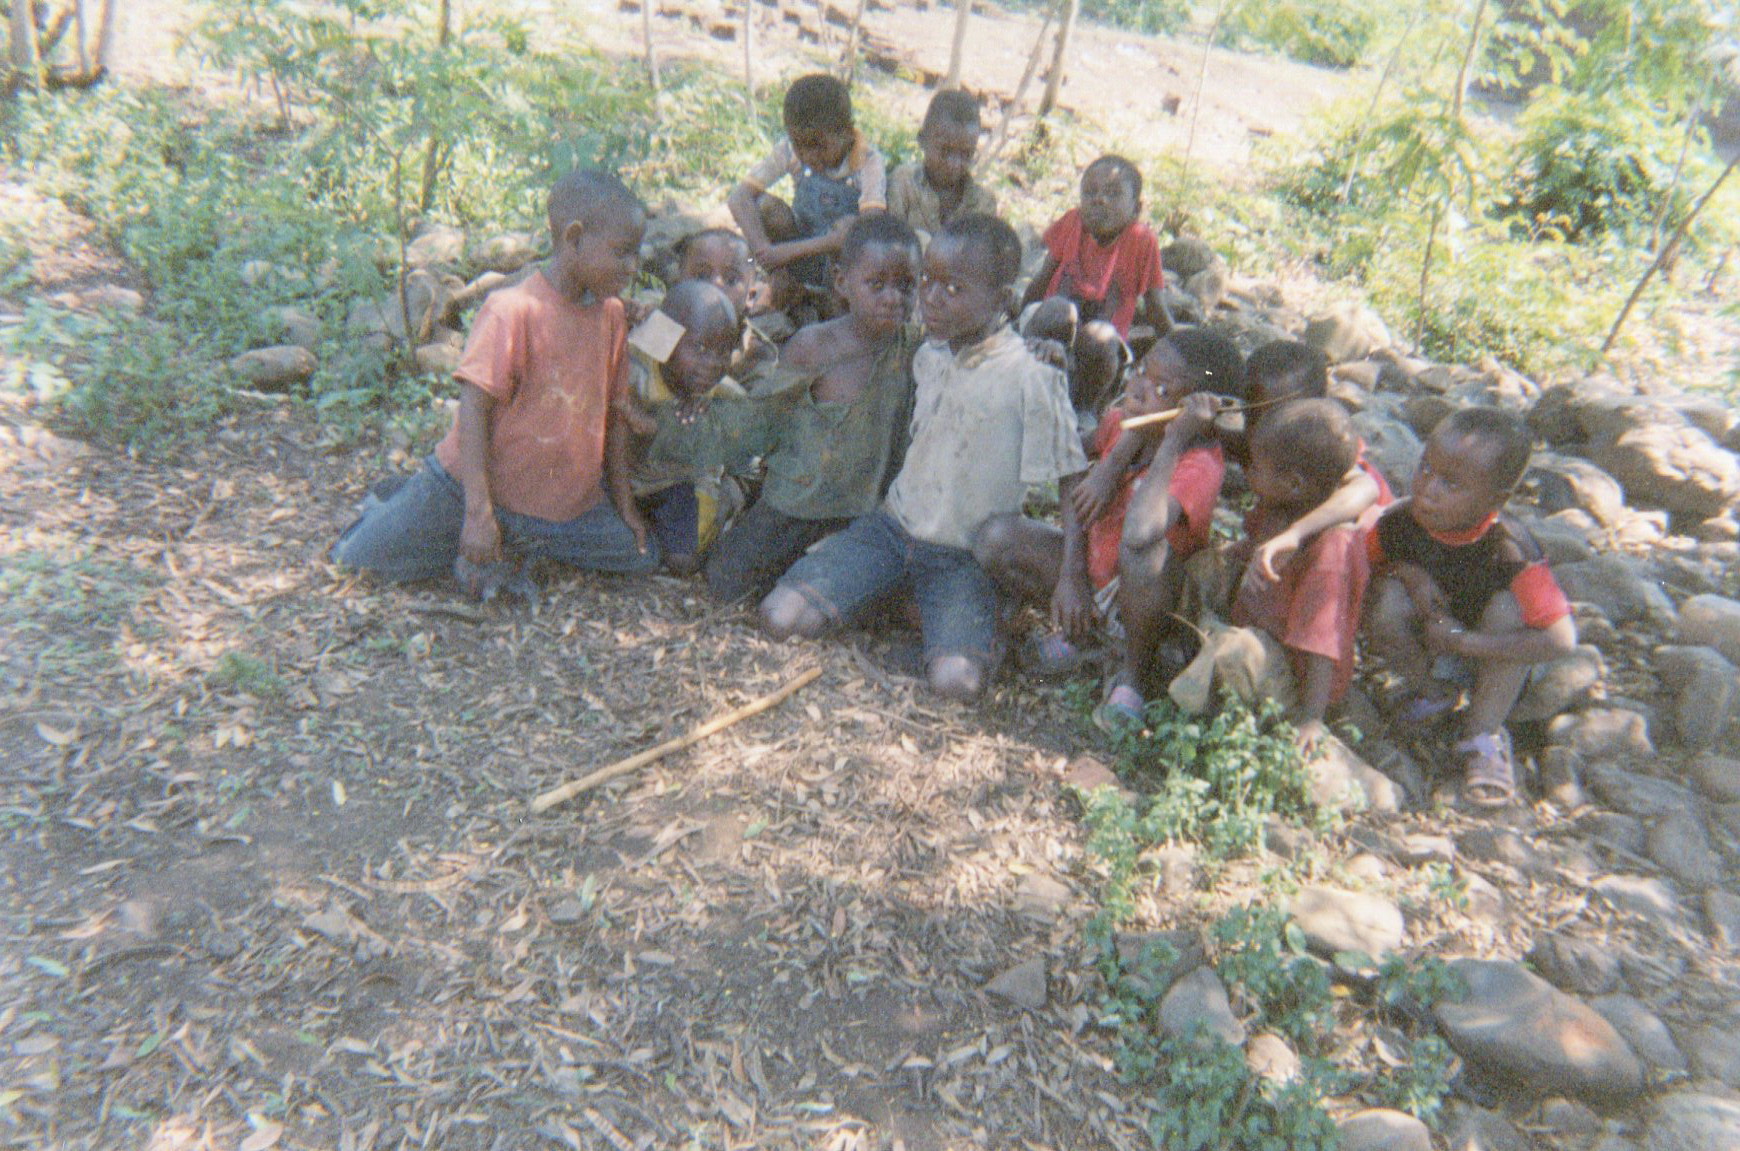  A group of vulnerable young people in the community. They have no support network since their parents were victims of the war.&nbsp; 